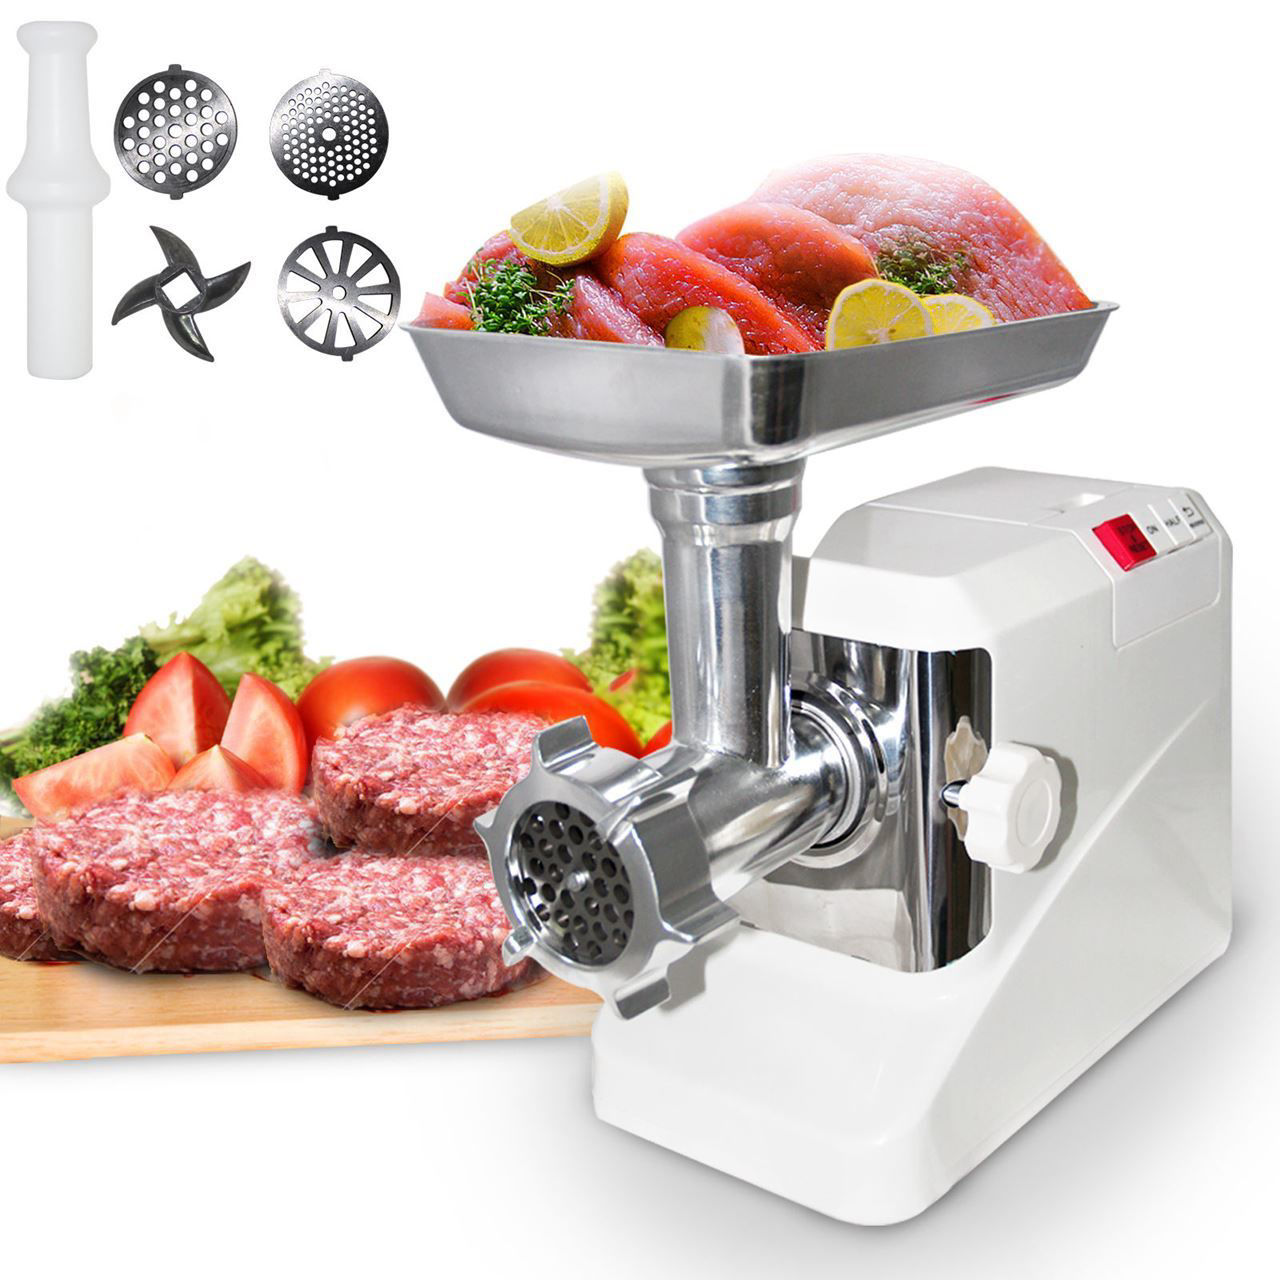 ConvenienceBoutique Meat Grinder Industrial 2000 Watt Electric 2.6 HP  3 Speed with 3 Plates